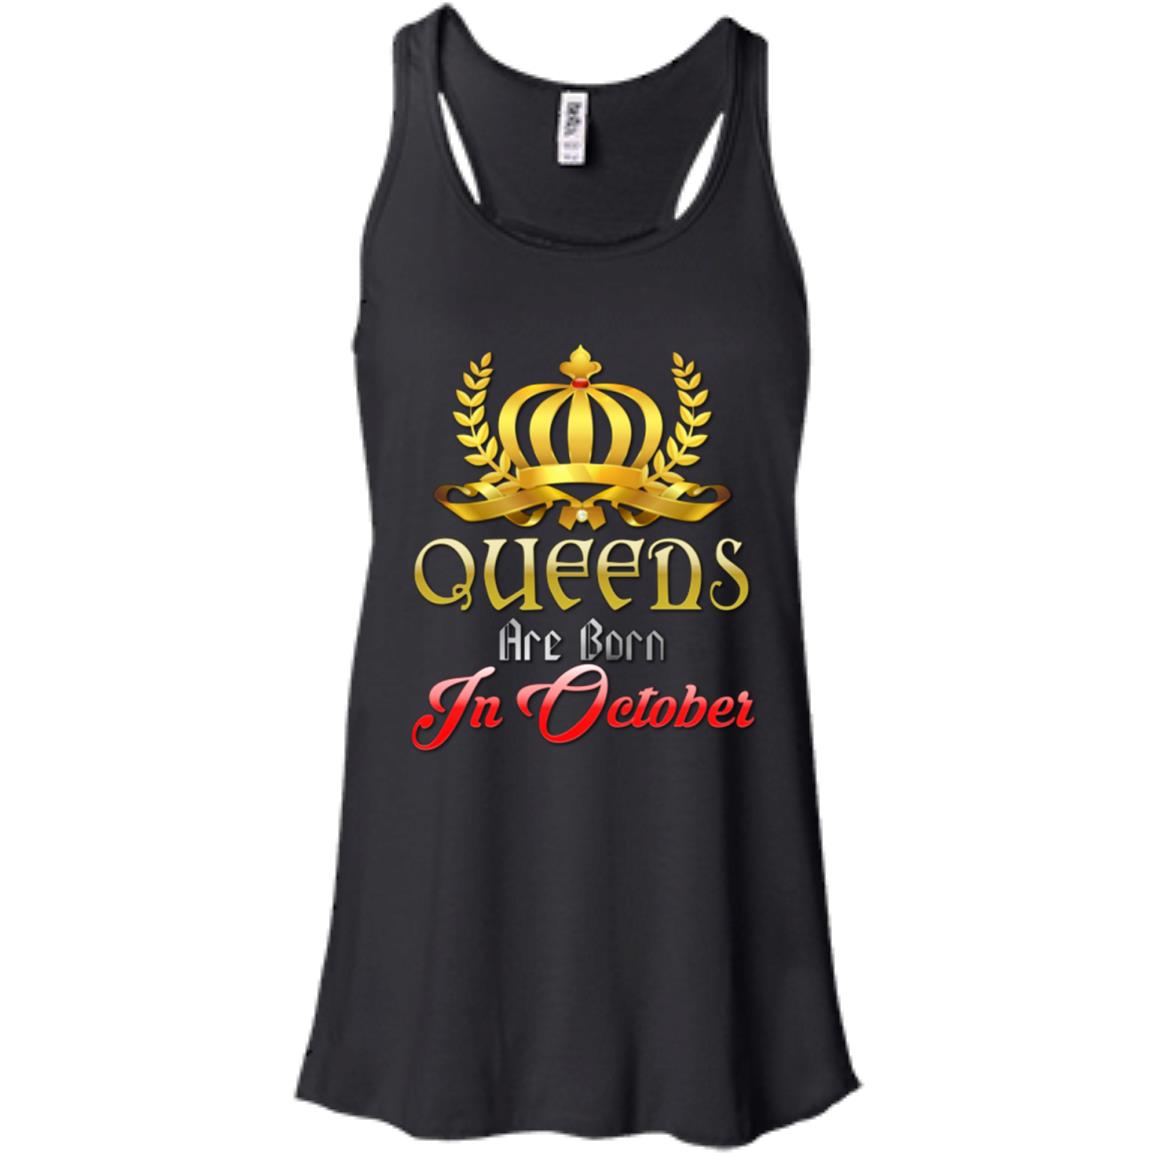 Queens Are Born In October shirts Women tees n tanks - GoneBold.gift